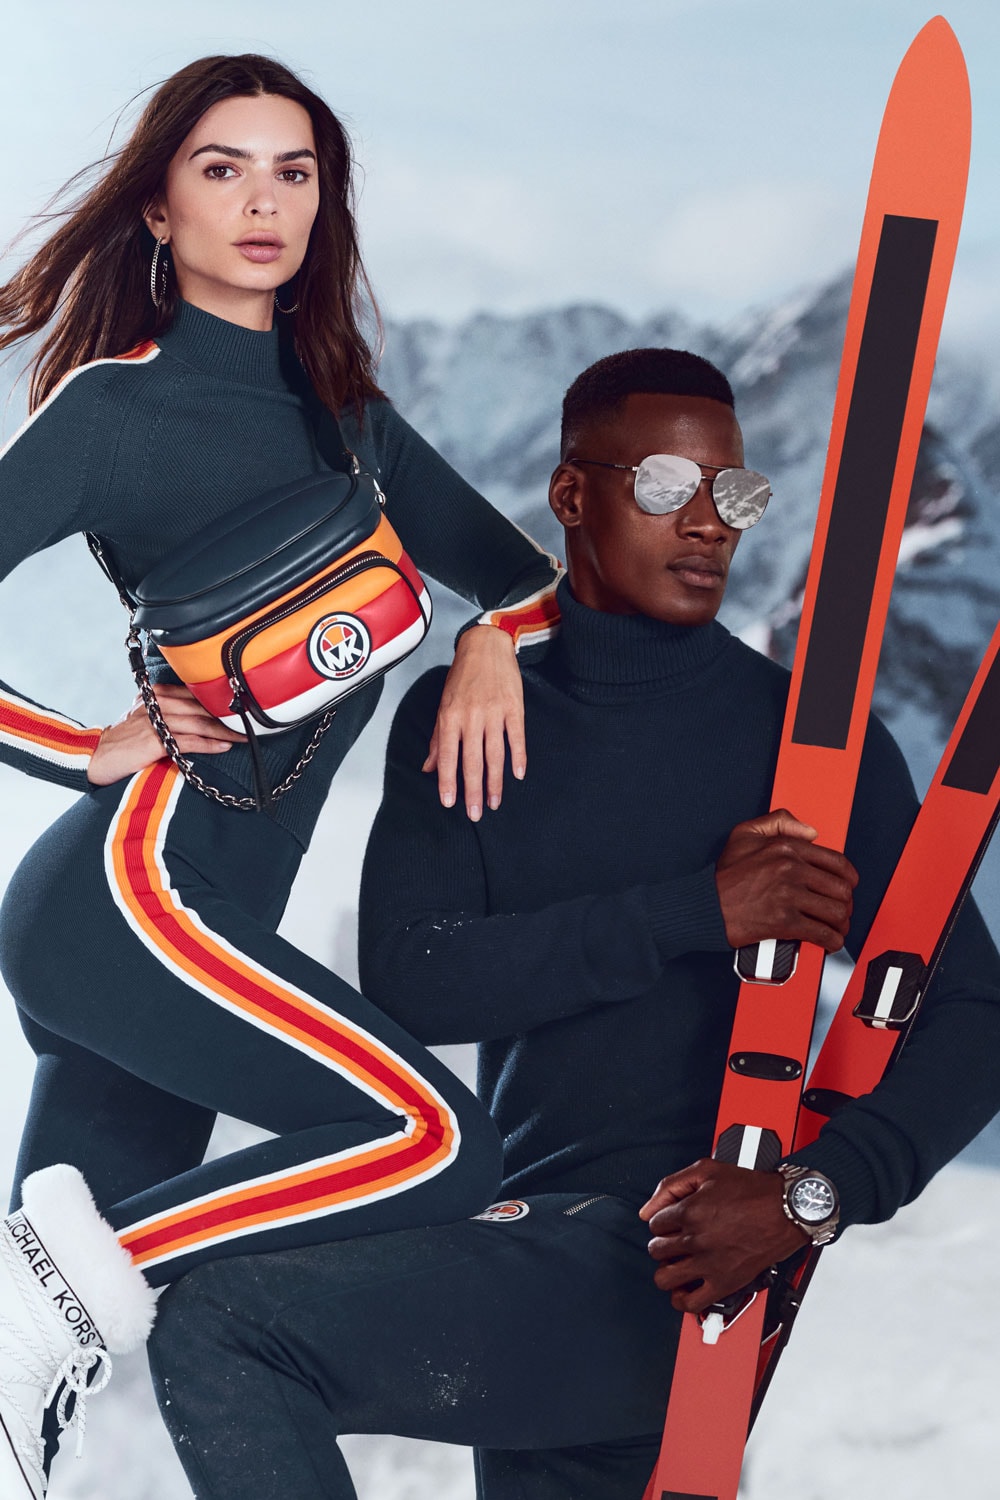 Michael Kors And Ellesse Launch Skiwear Collection In Their Second